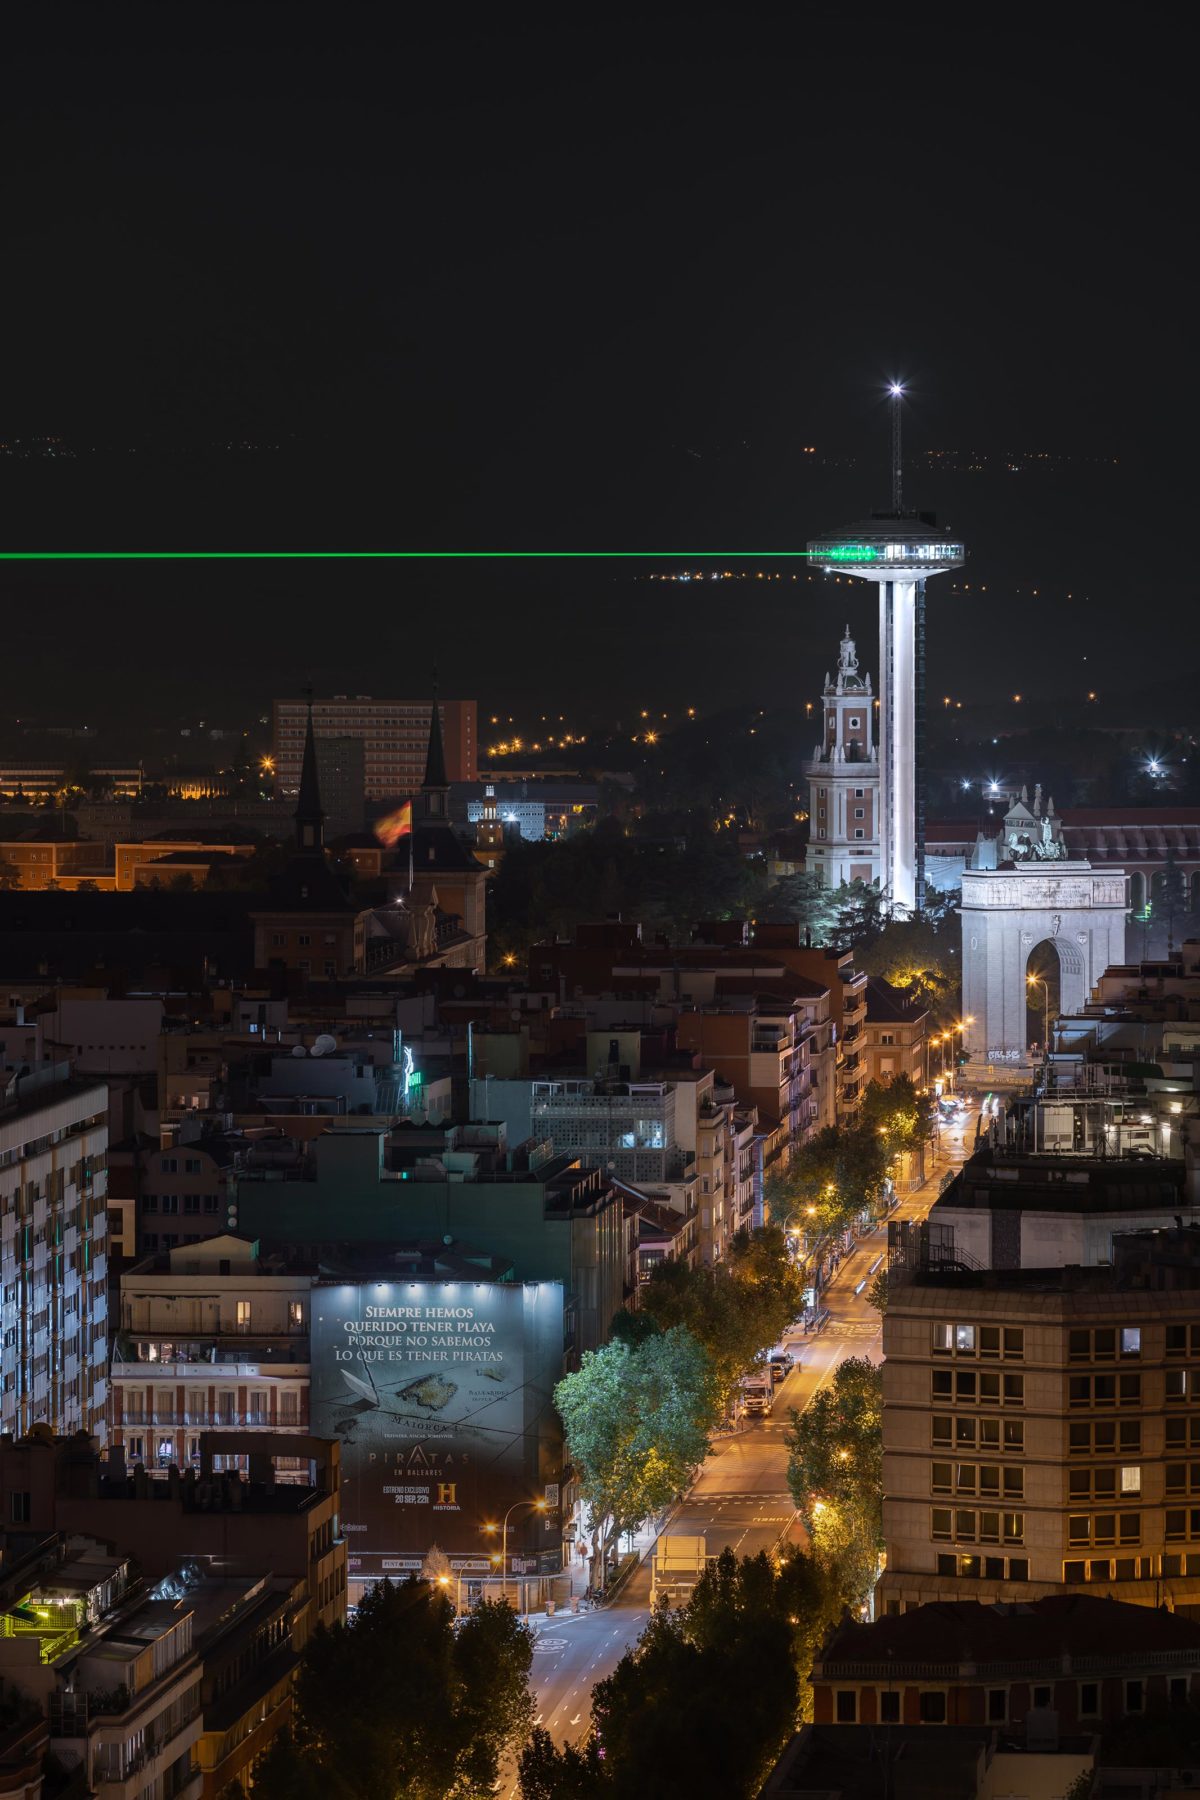 8 high-power green lasers cross and illuminate the Madrid sky The iconic “Mirador de Moncloa” becomes a powerful beacon for this artistic action where SpY transforms the sky of Madrid for a couple of nights.